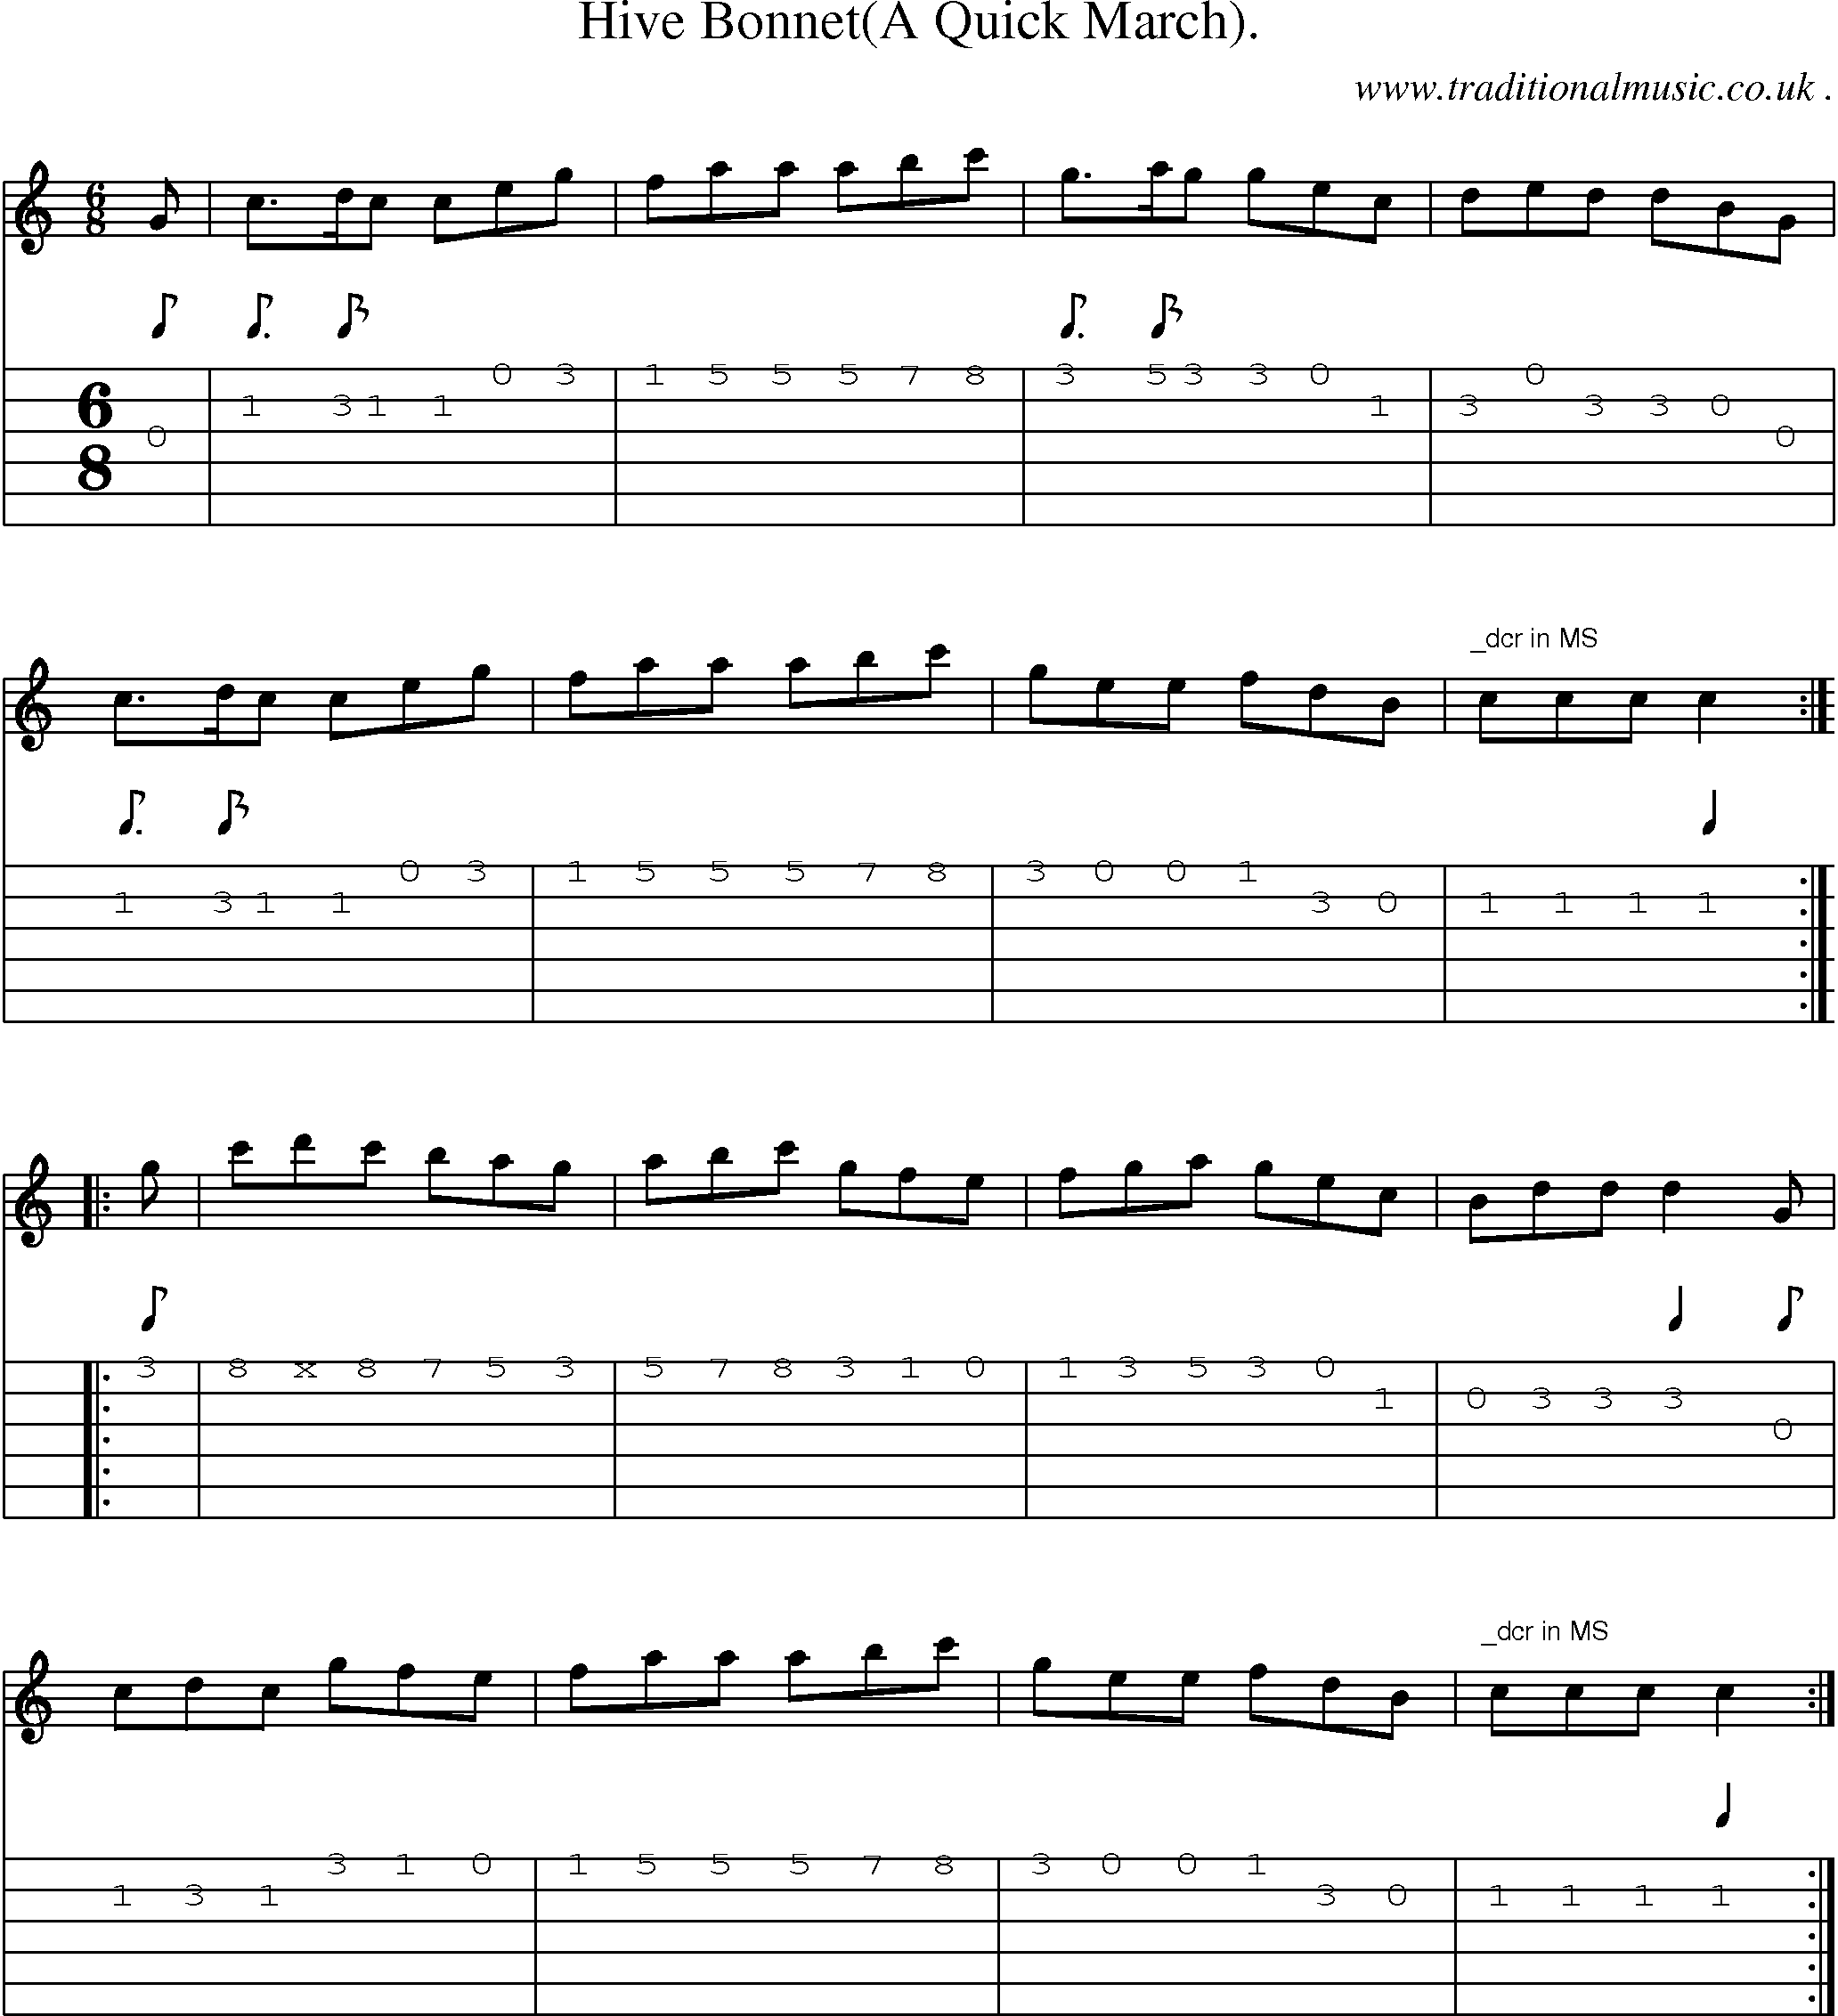 Sheet-Music and Guitar Tabs for Hive Bonnet(a Quick March)